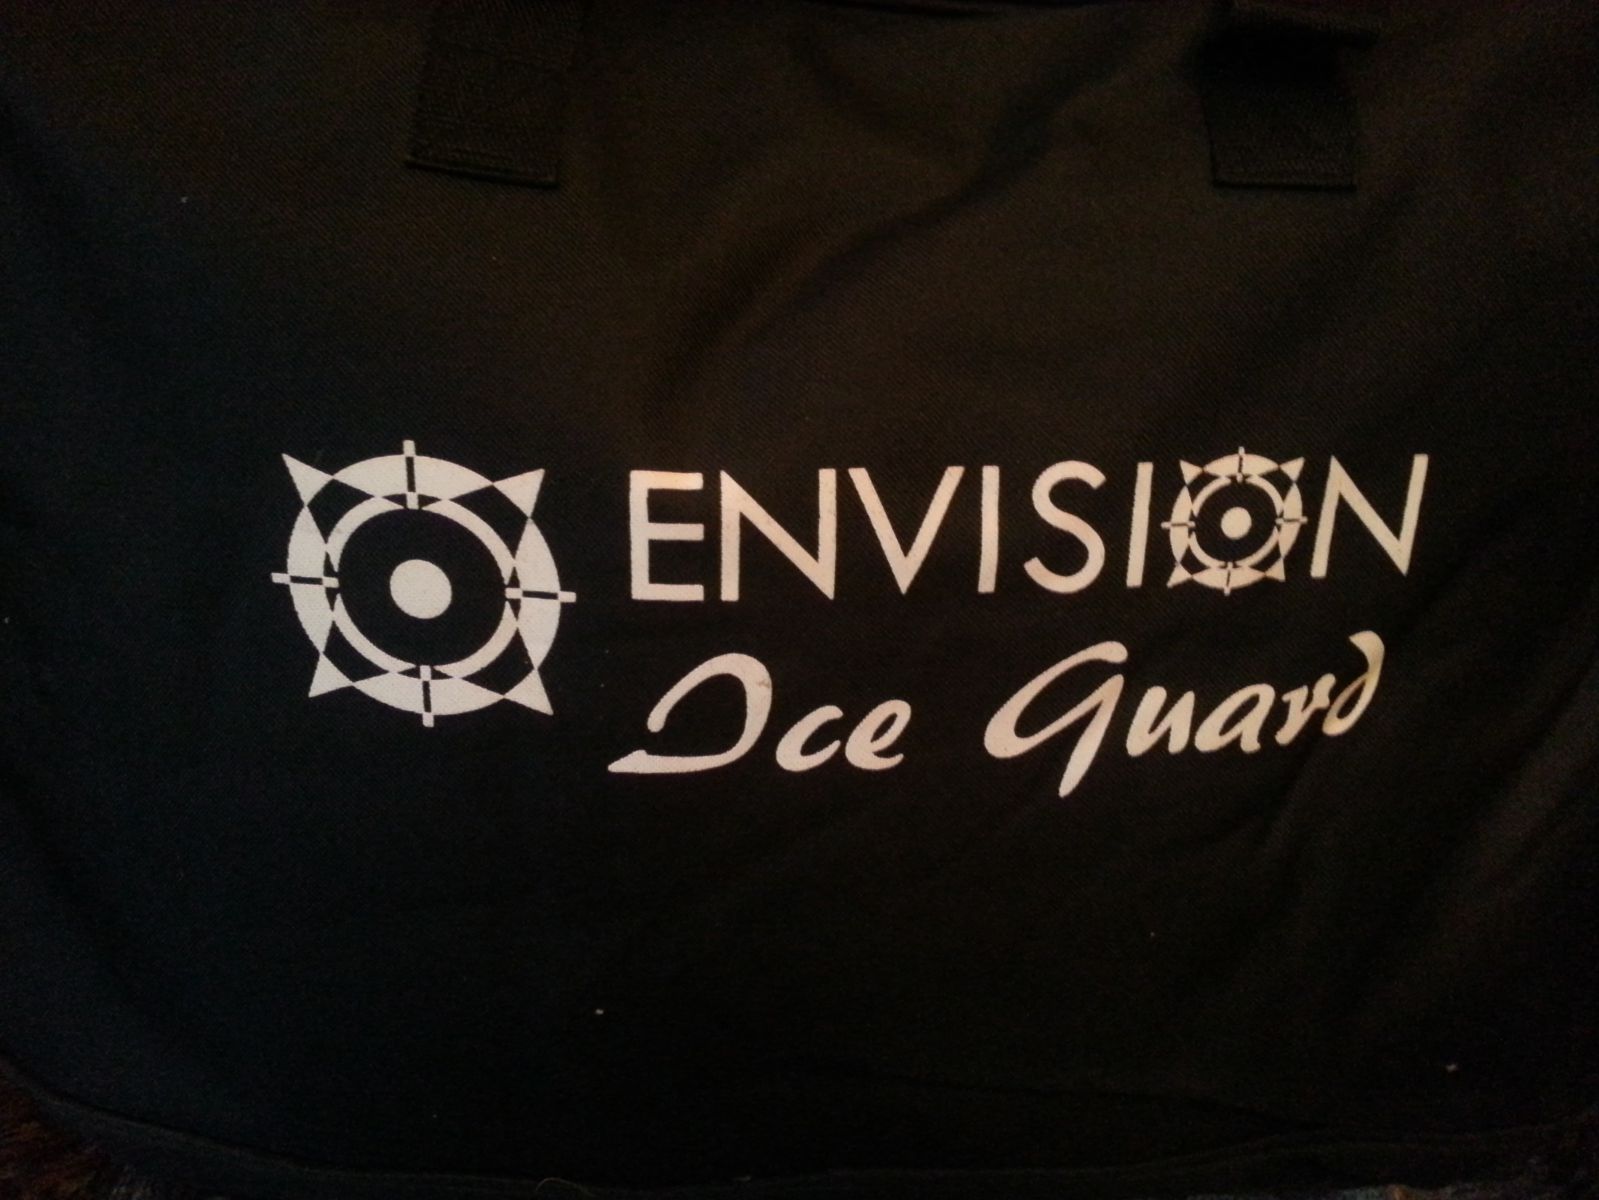 Envision Ice guard